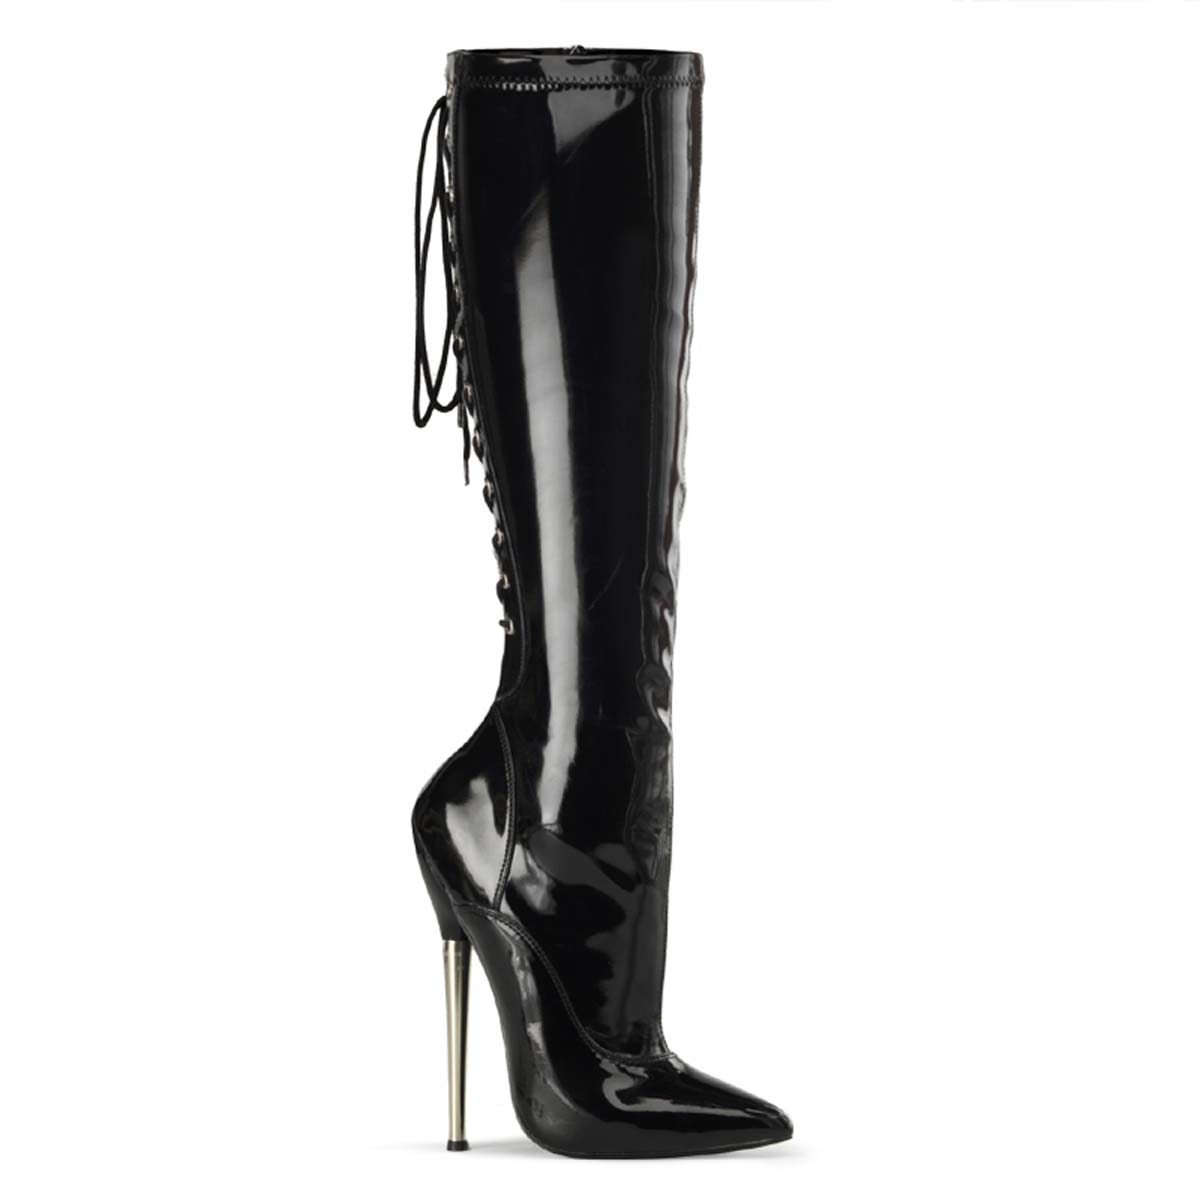 Pleaser Devious Dagger-2064 - Black Stretch Pat in Sexy Boots - $99.95